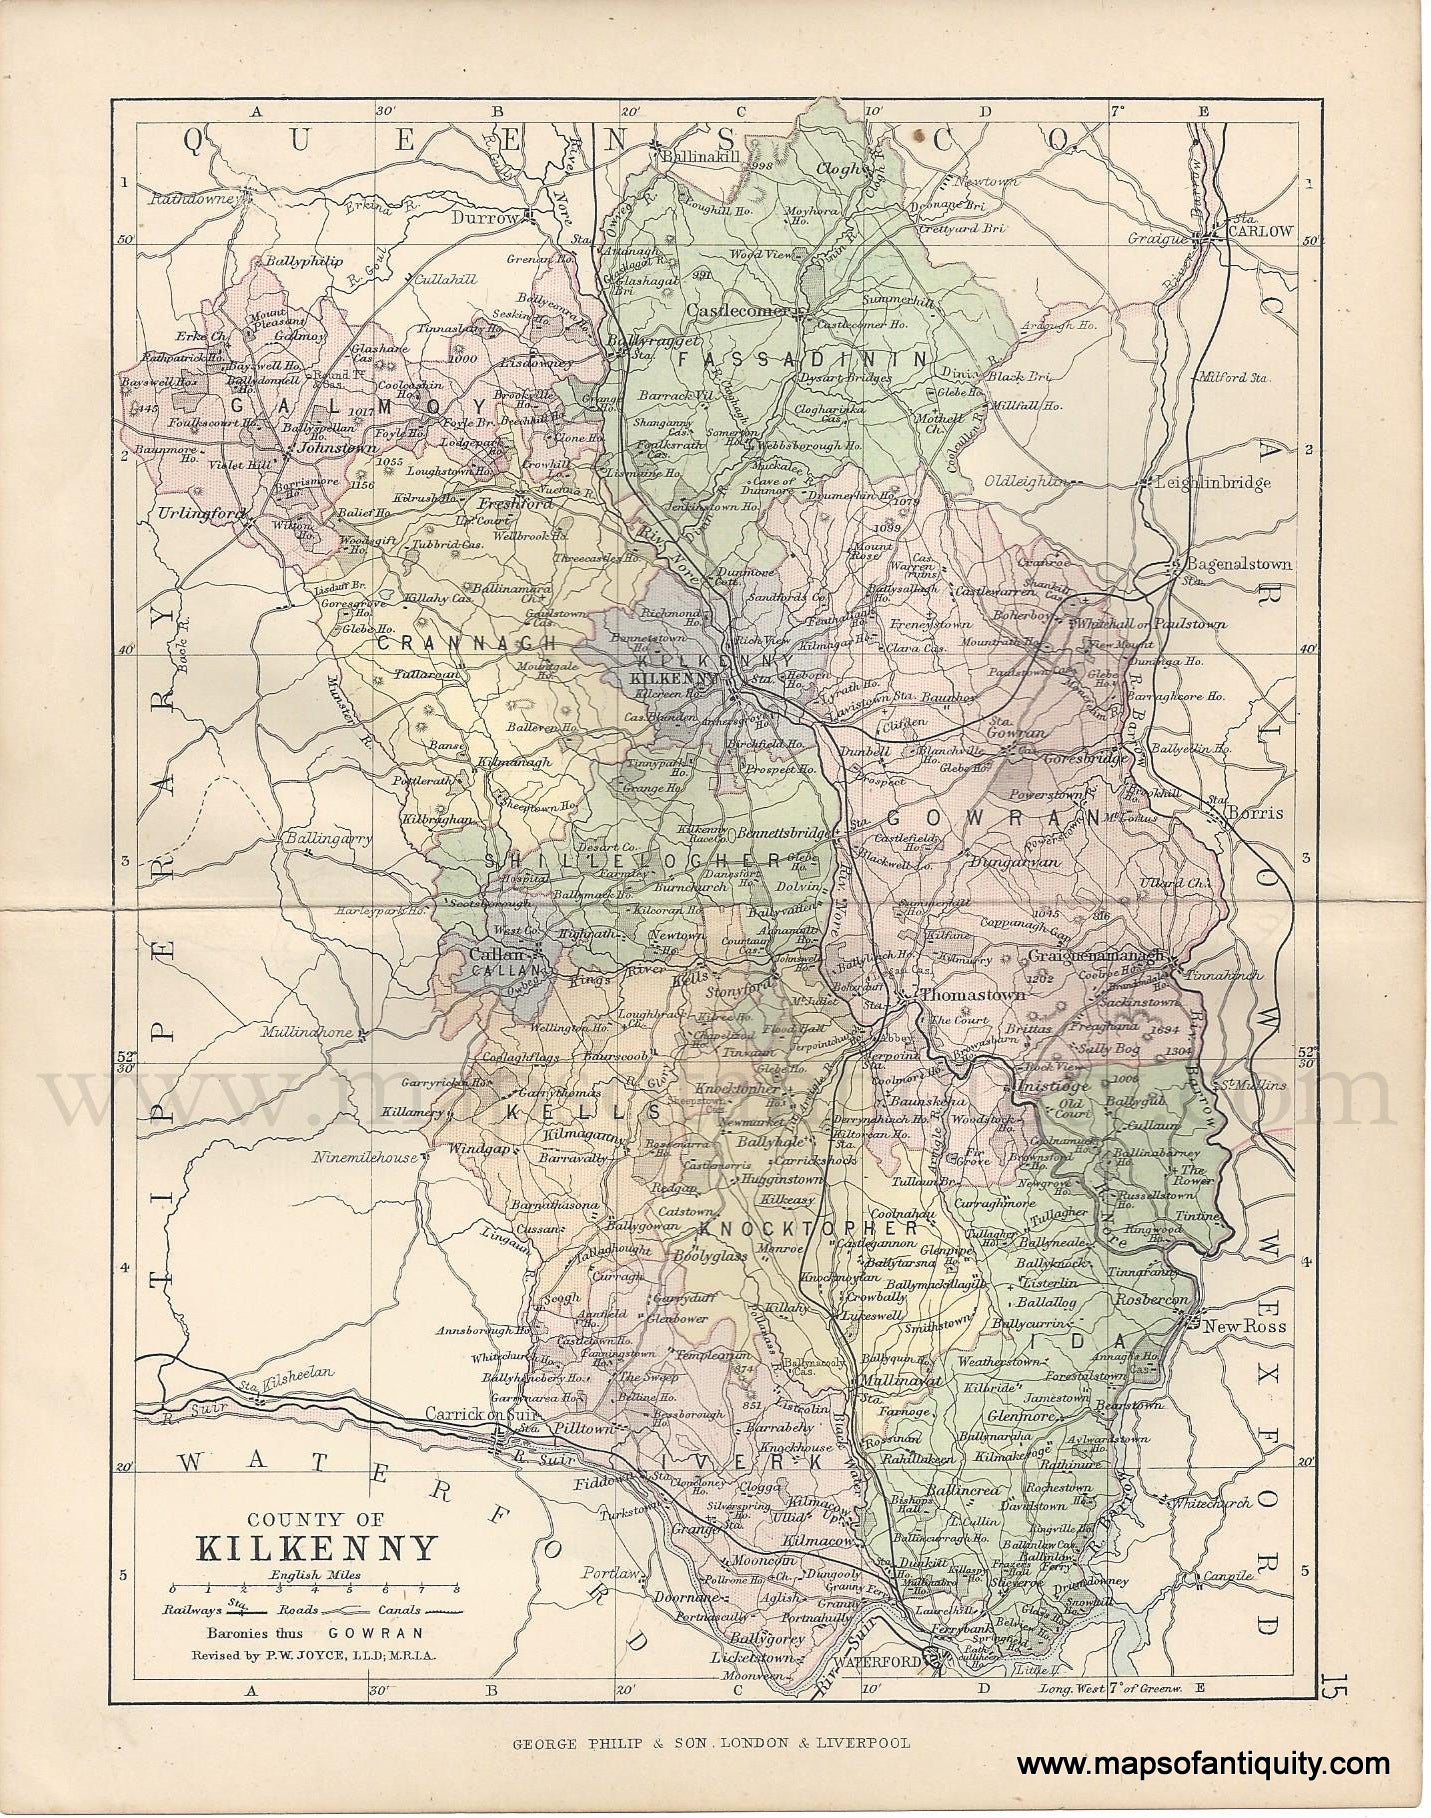 Genuine-Antique-Map-Ireland-County-of-Kilkenny-1884-George-Philip-&-Son-Maps-Of-Antiquity